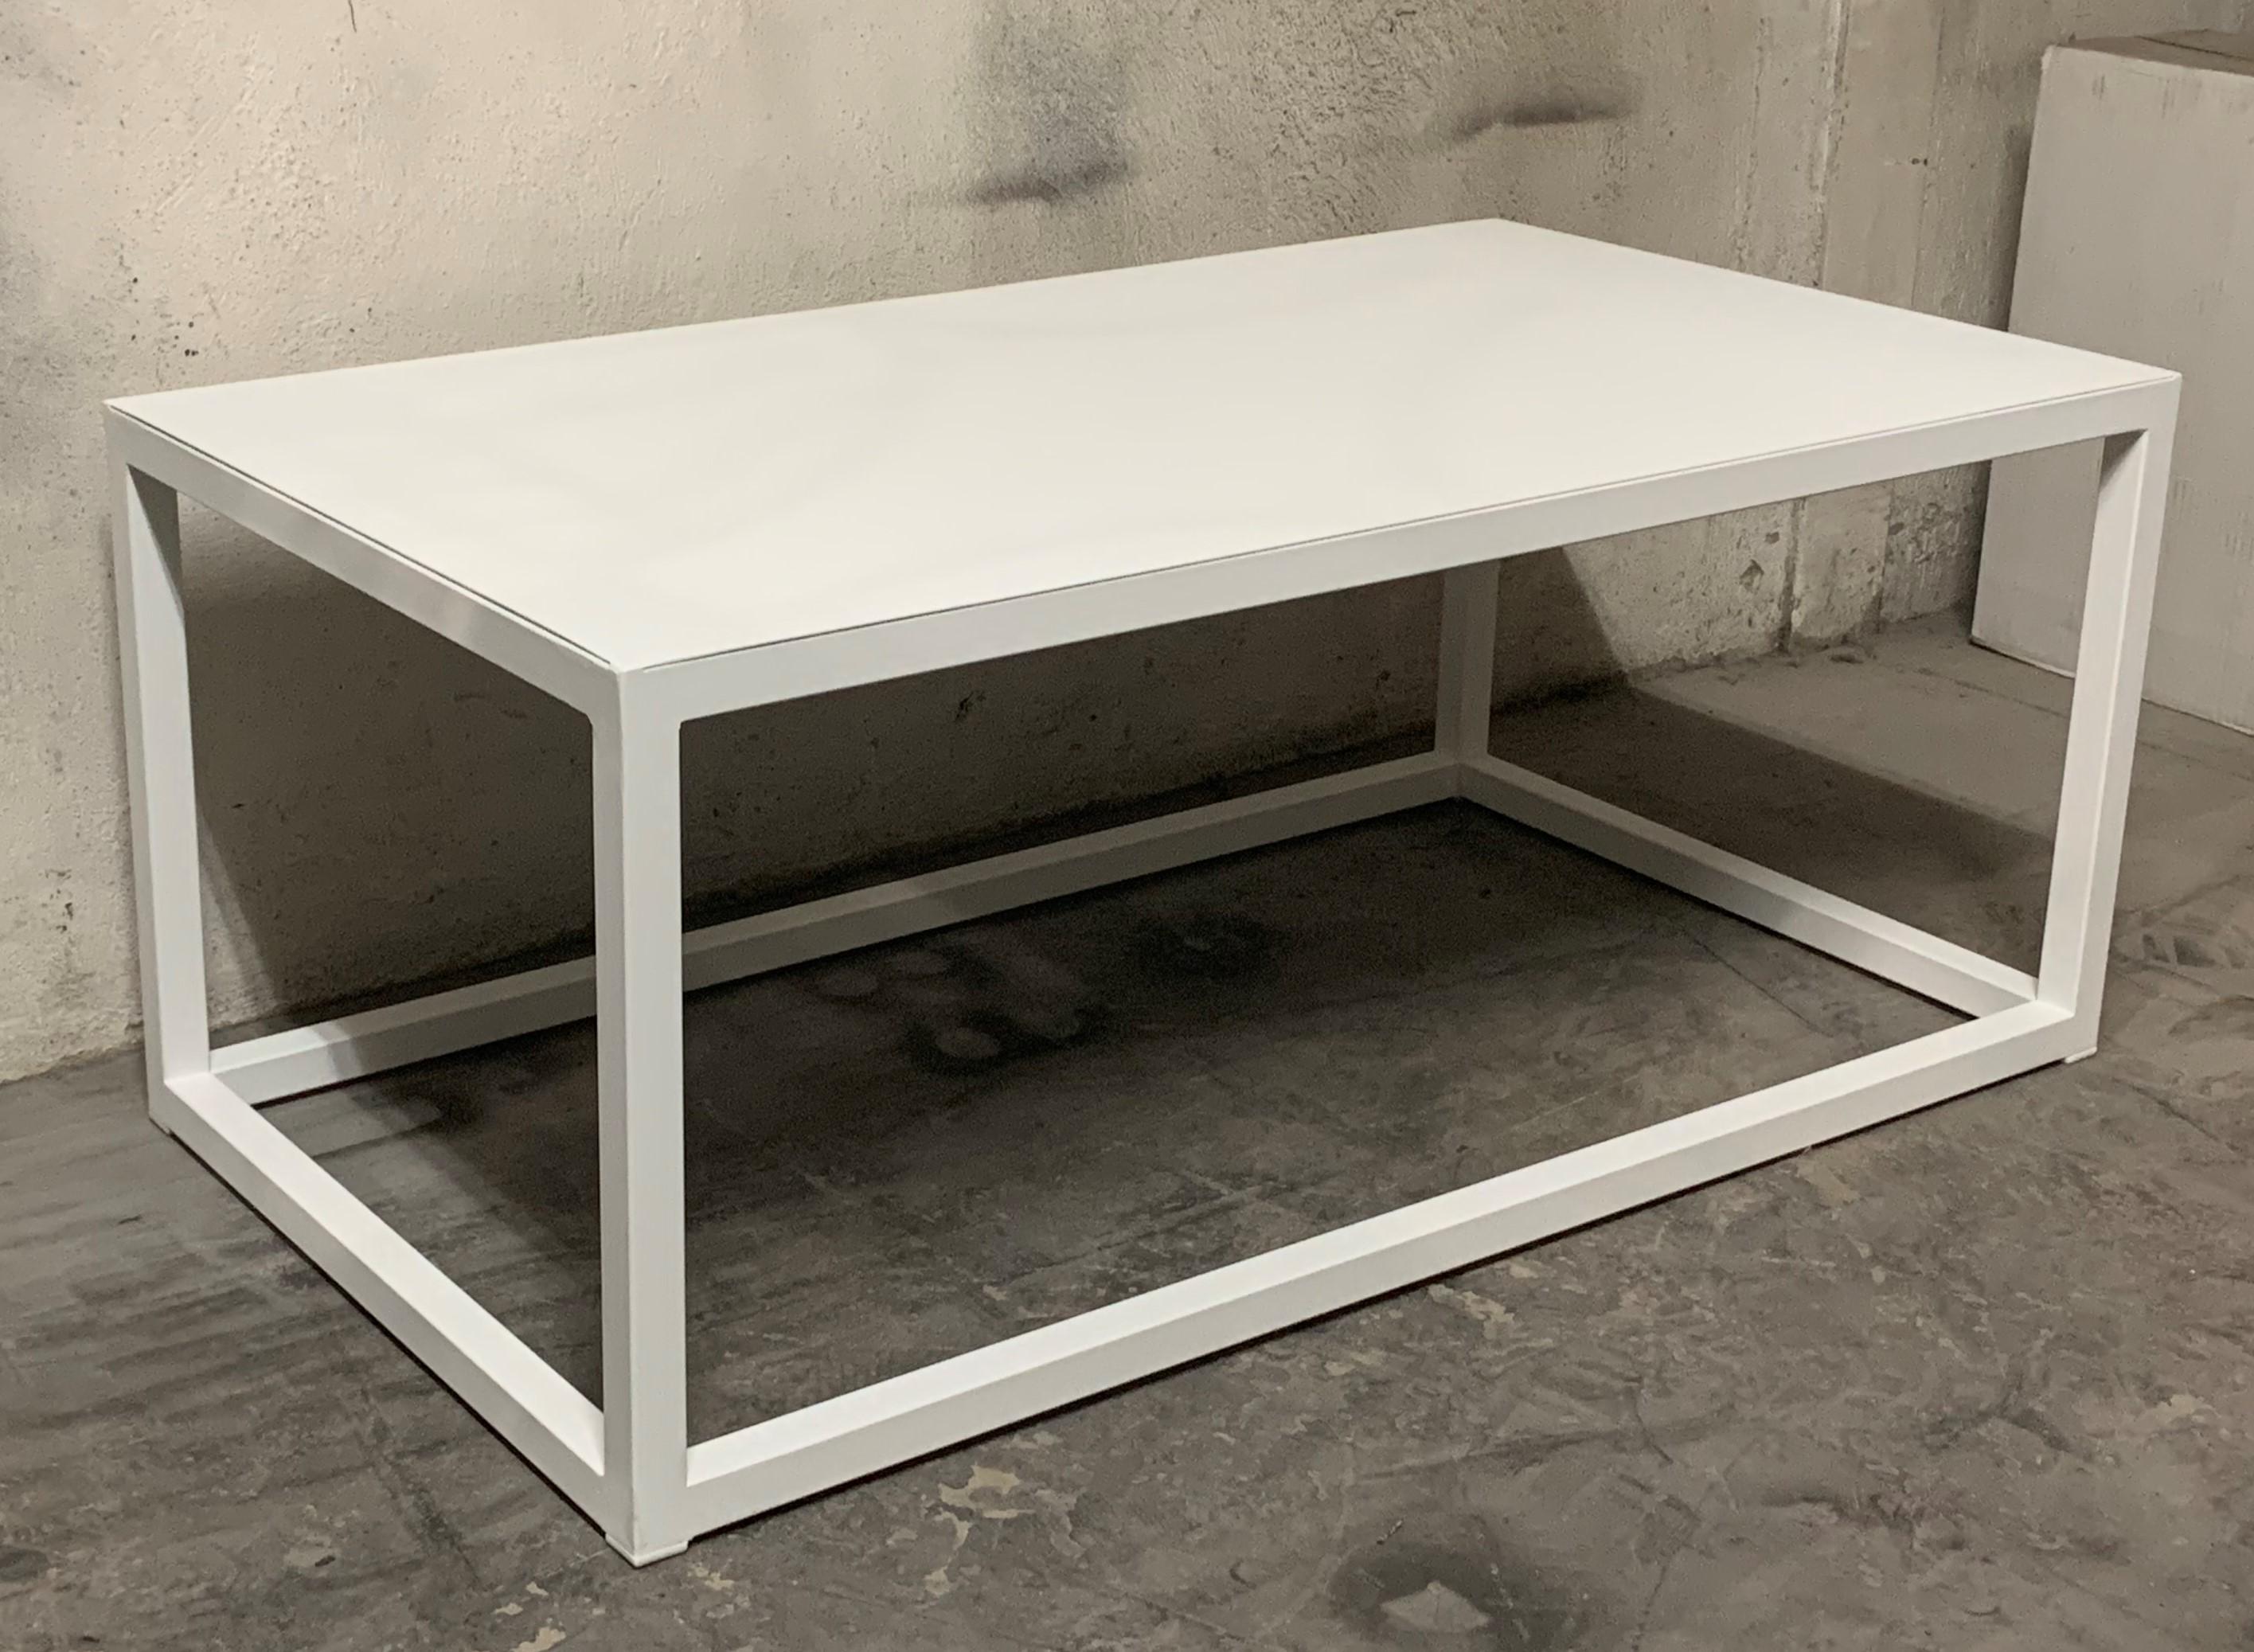 New Modern Rectangular White Table with Metal Top, Indoor or Outdoor In New Condition For Sale In Miami, FL